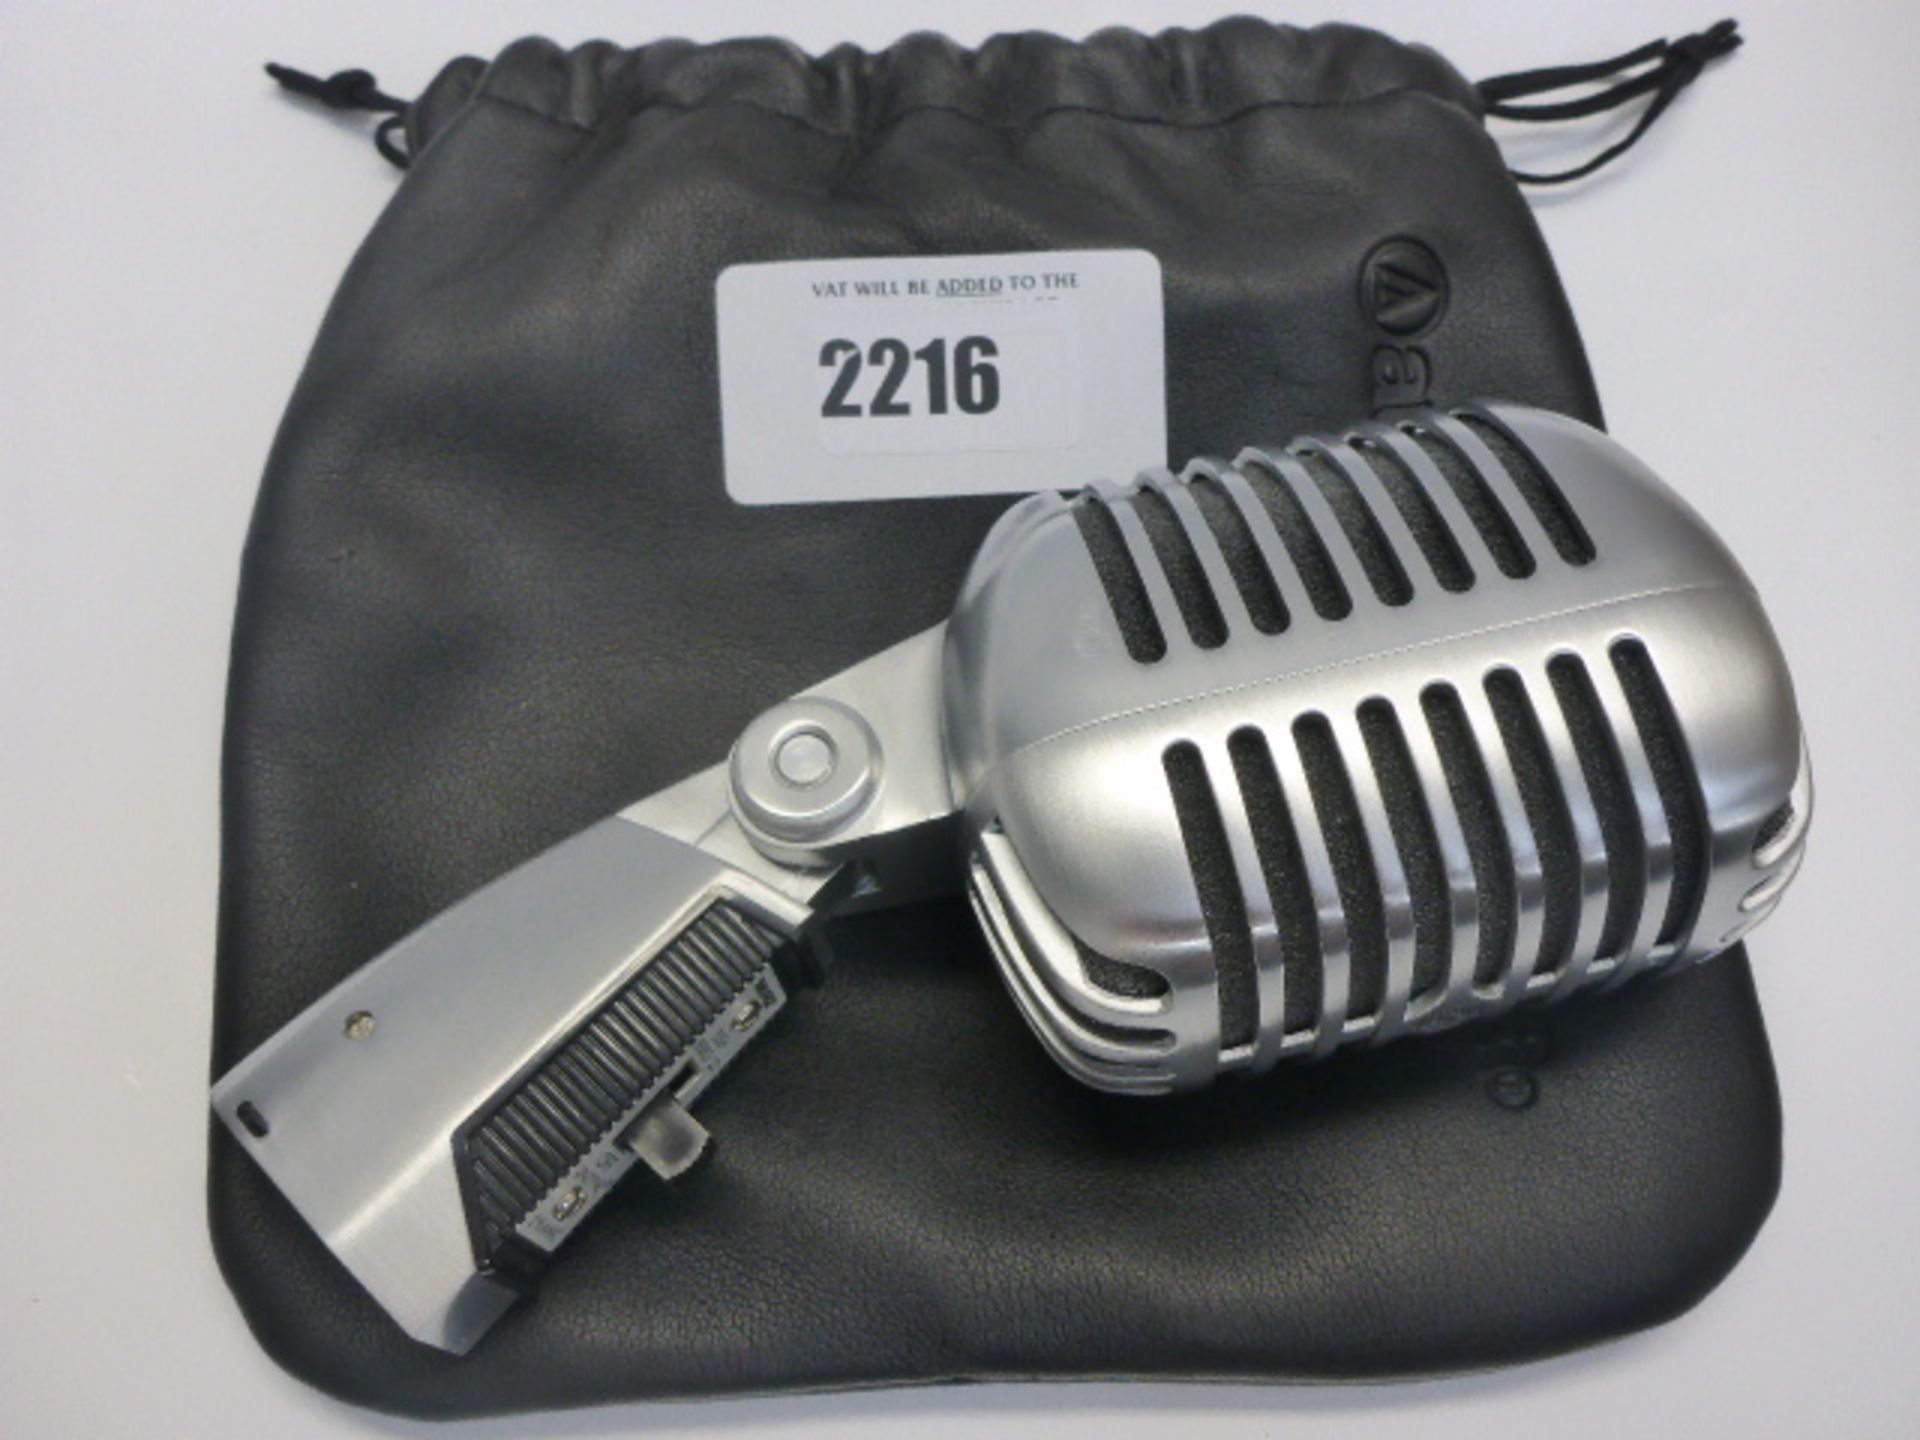 Shure Series II 555H microphone with audio technica pouch